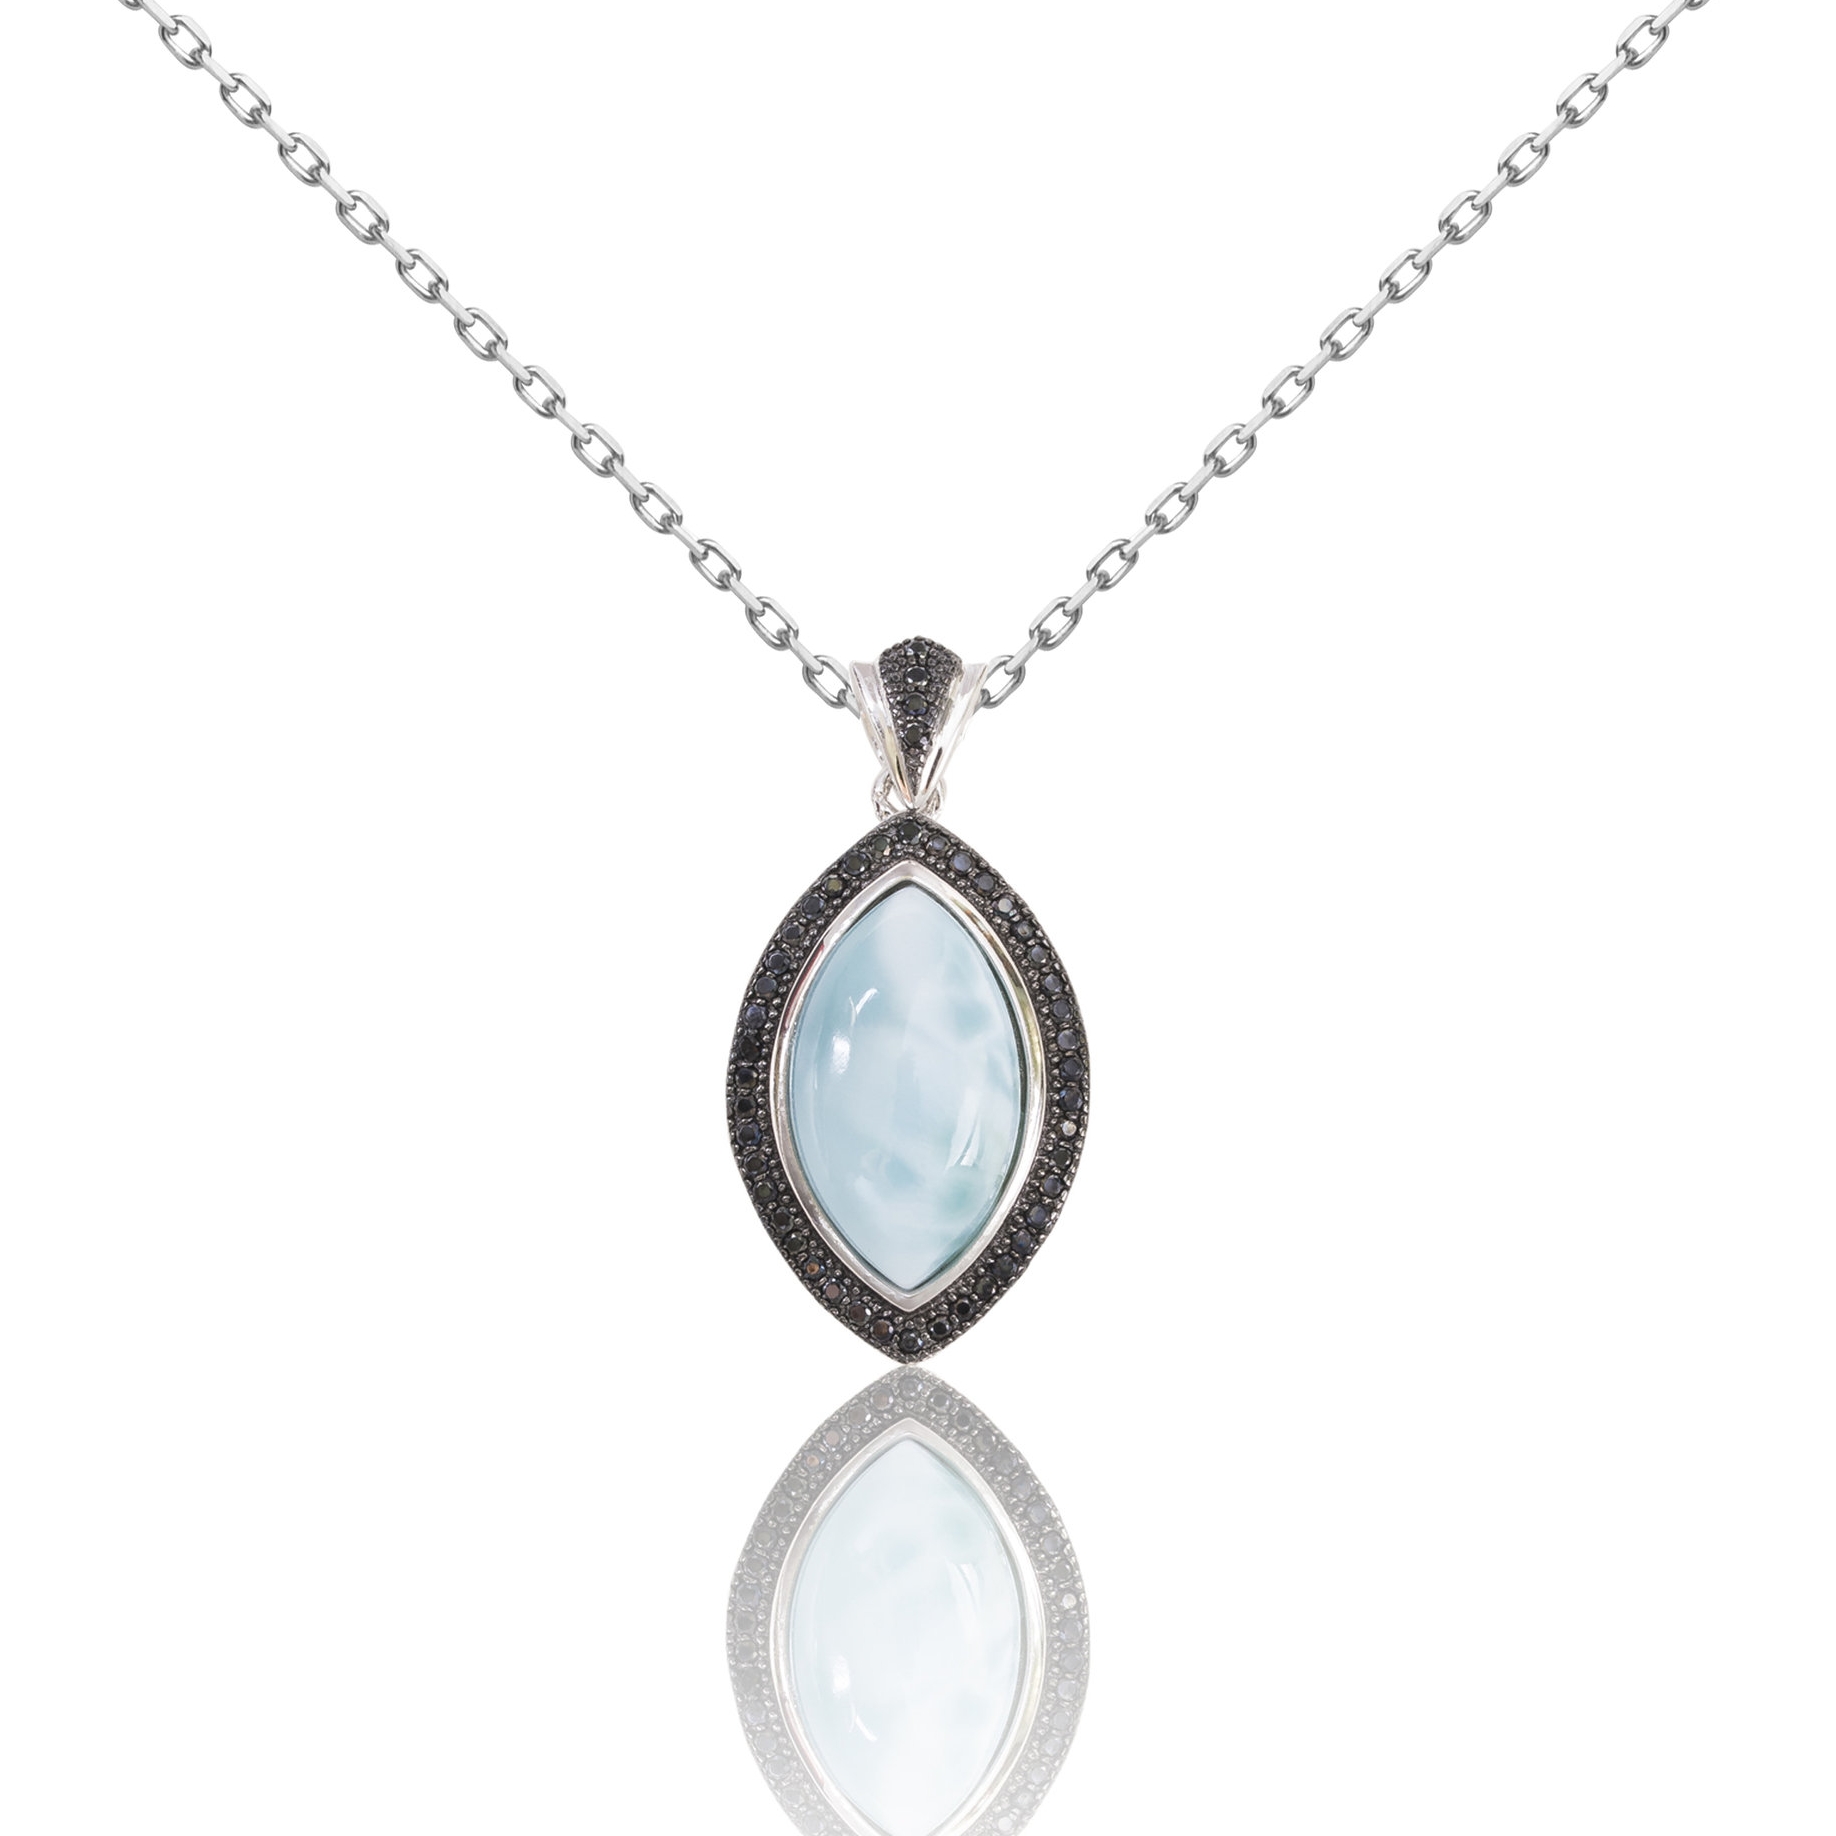 High quality Larimar Jewelry using sterling silver Collection Buy ...